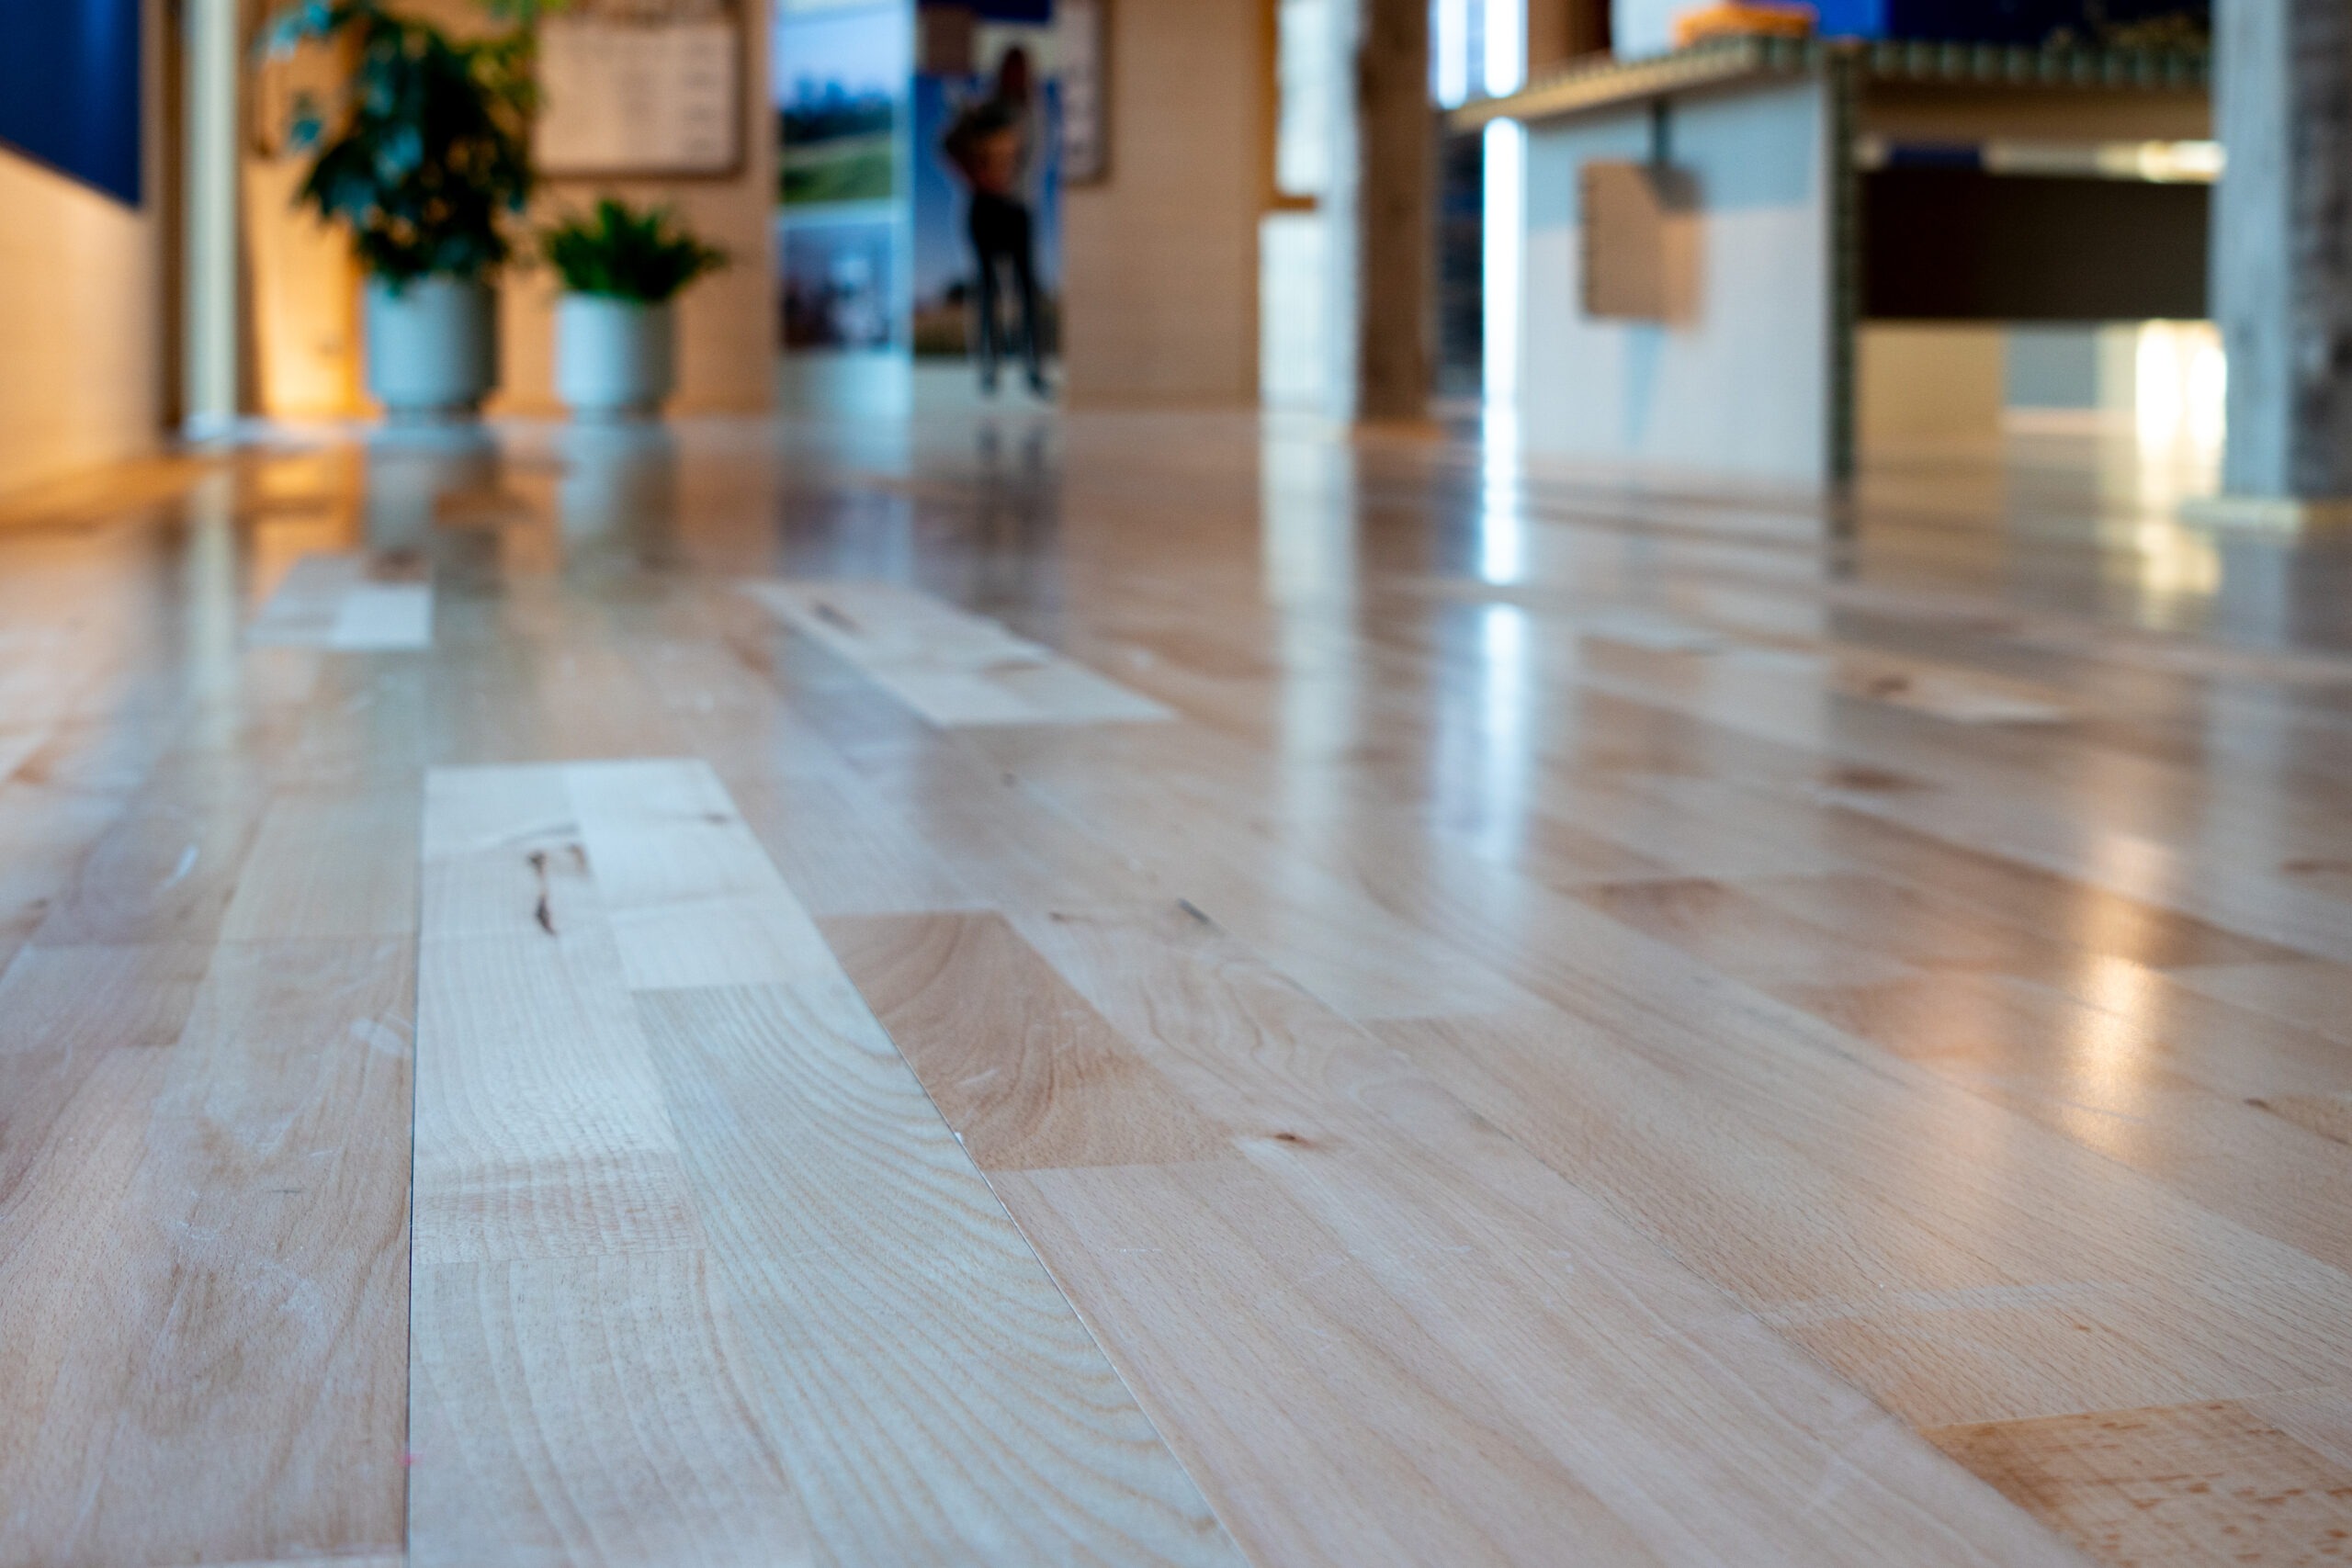 biobased products made into floor